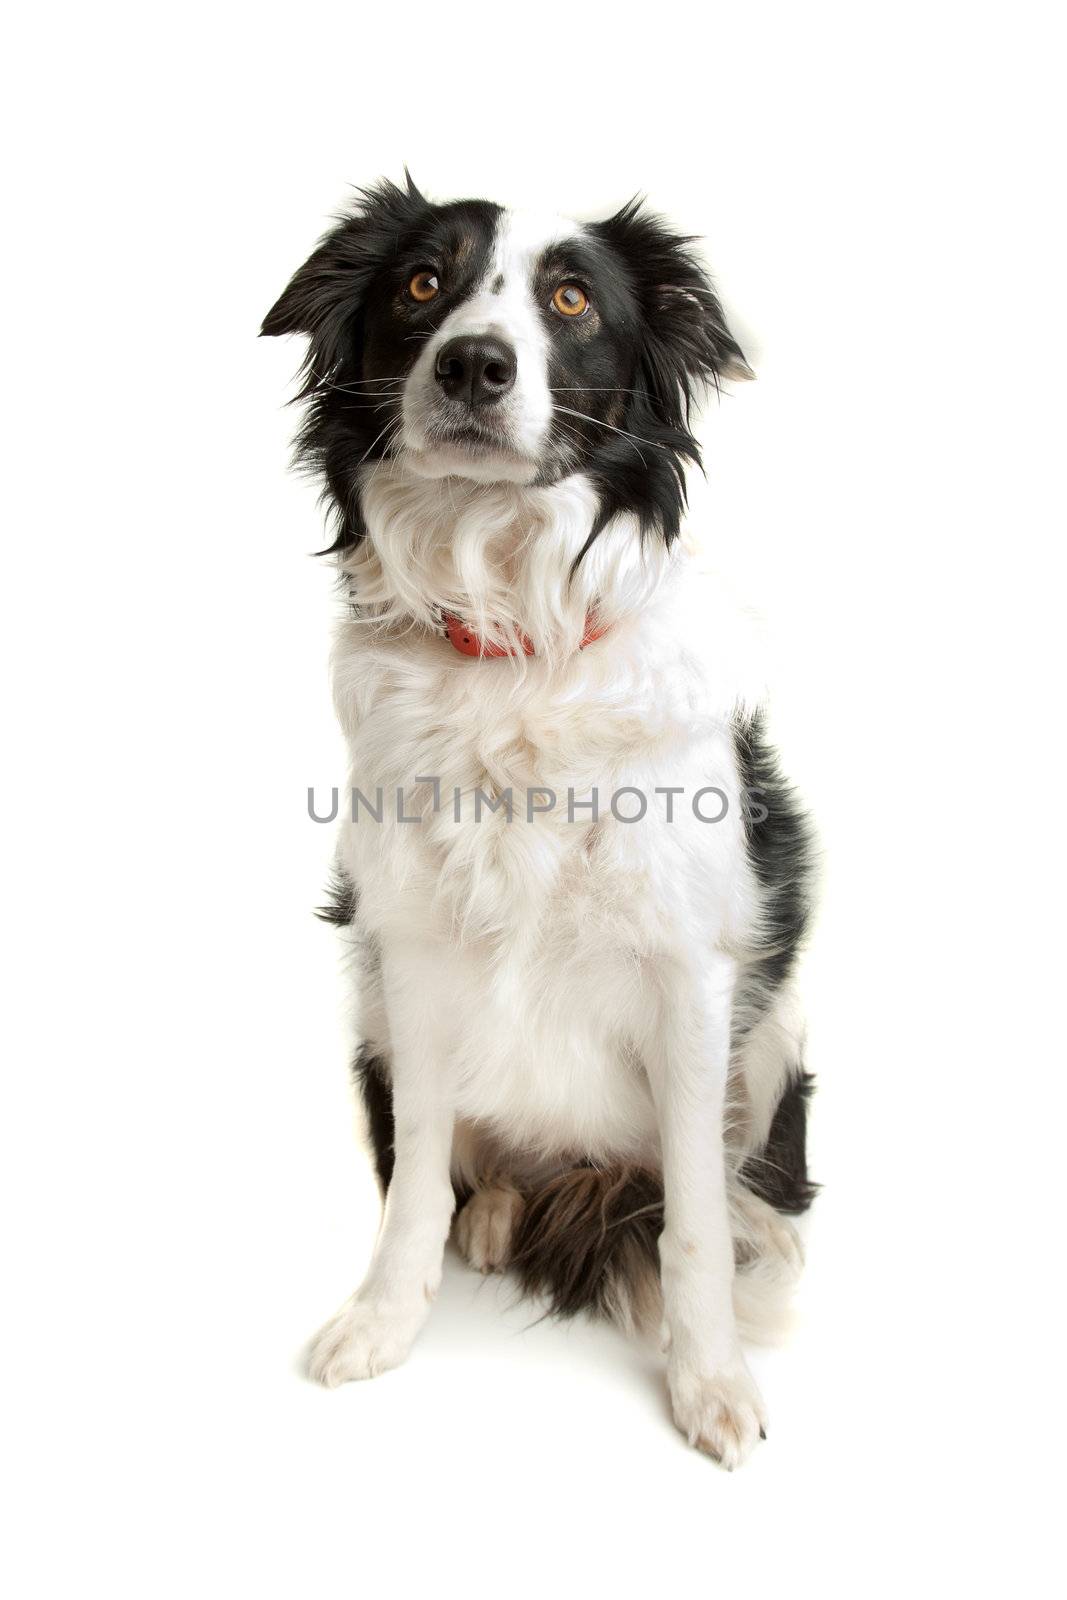 black and white border collie sheepdog on a white background